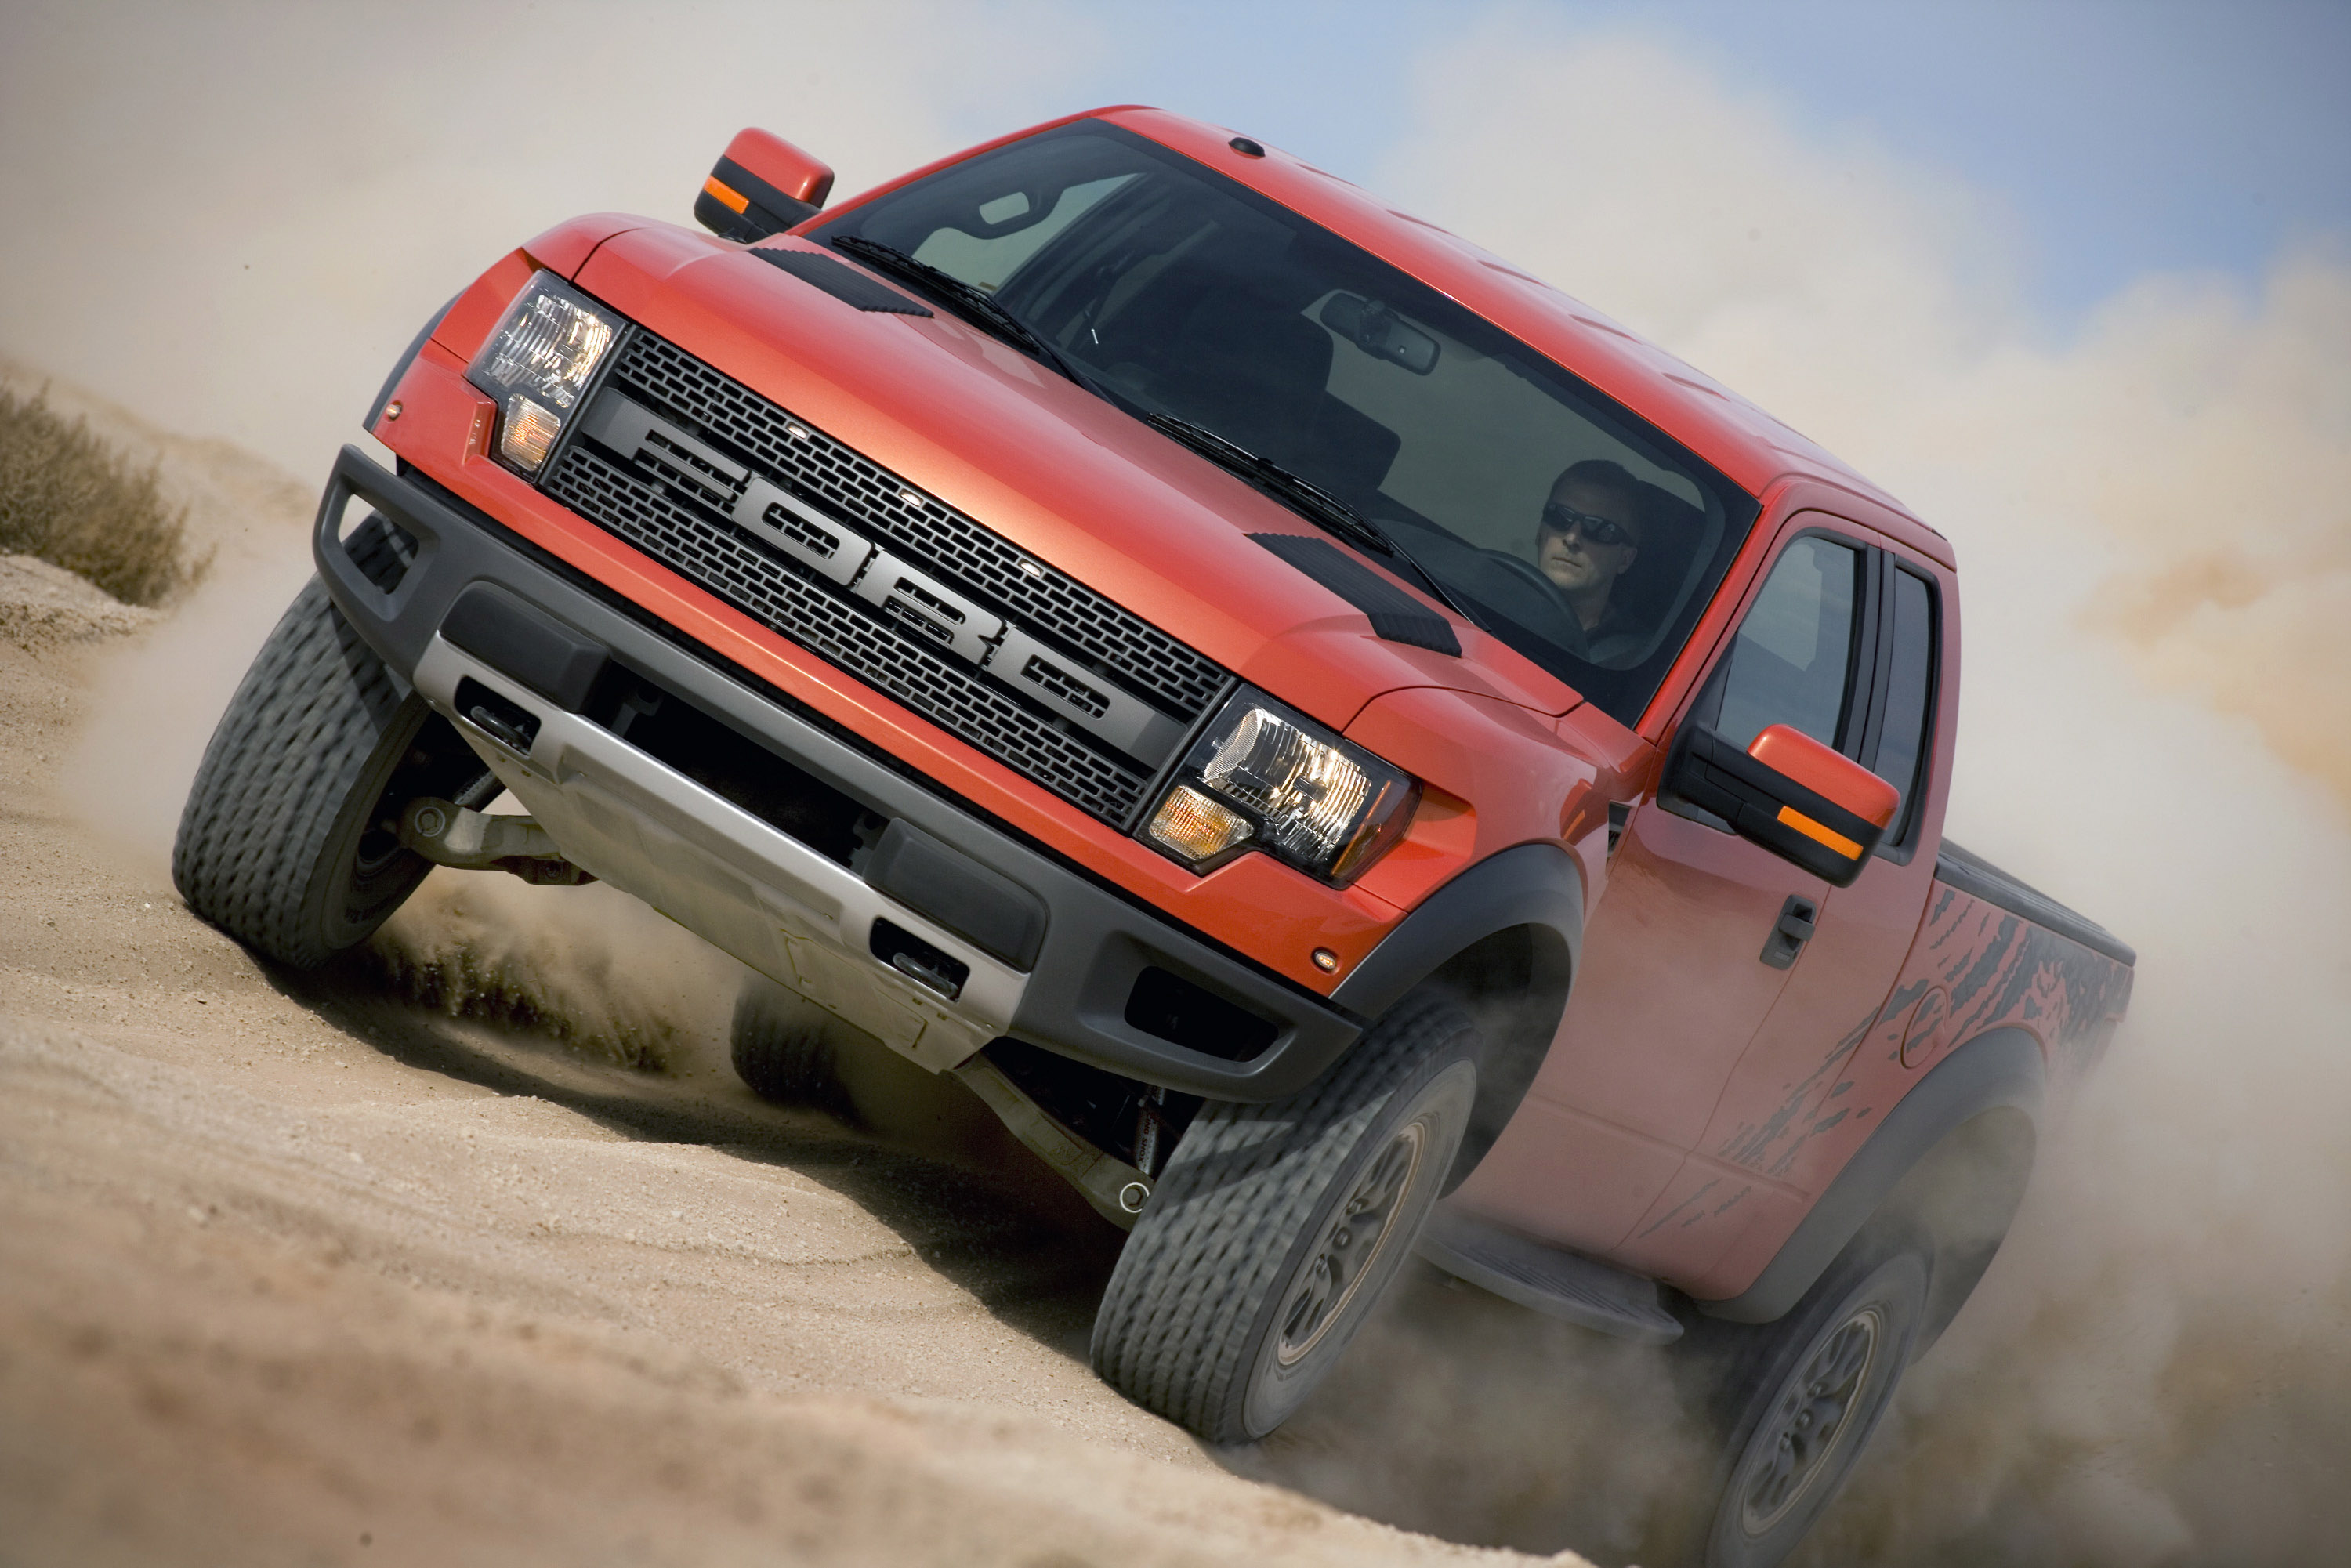 2010 Ford F-150 SVT Raptor picture - pic10238. 